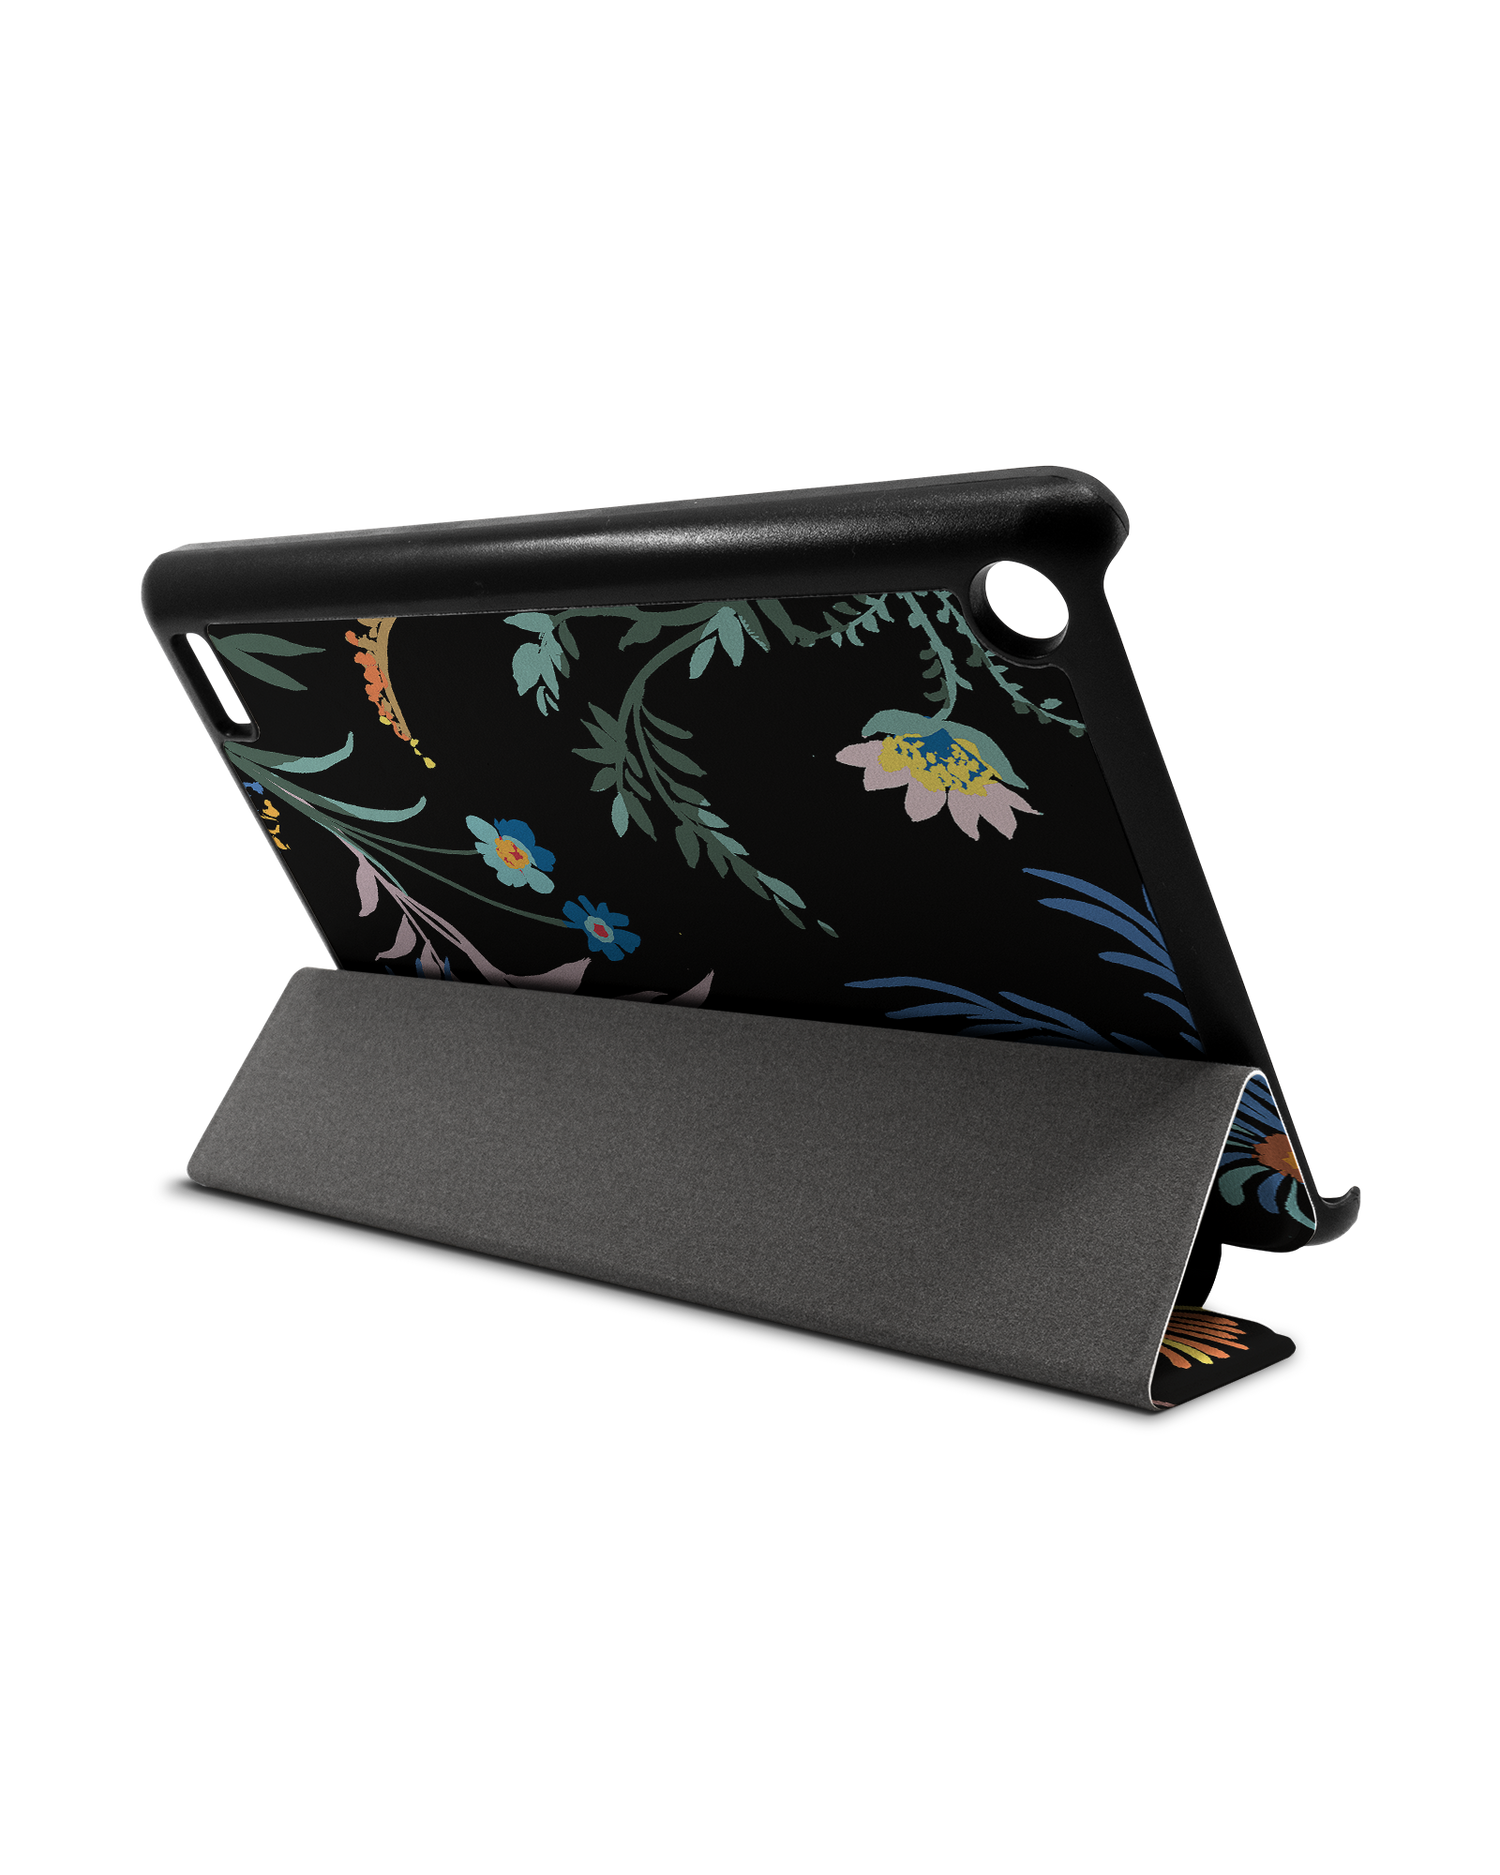 Woodland Spring Floral Tablet Smart Case for Amazon Fire 7: Used as Stand